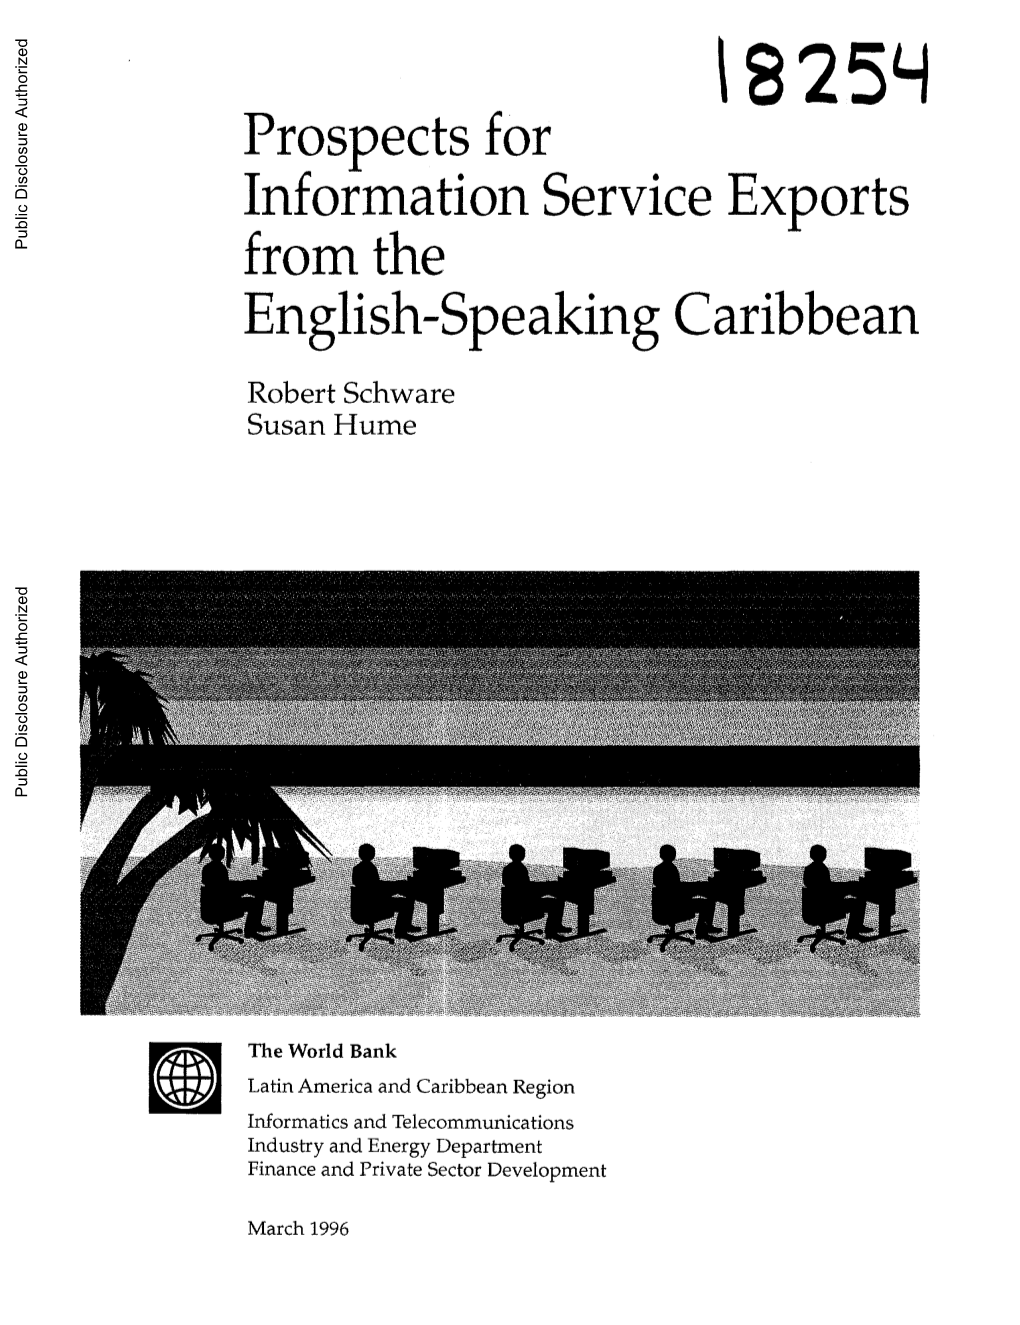 Prospects for Information Service Exports from the English-Speakingcaribbean Robert Schware Susan Hume